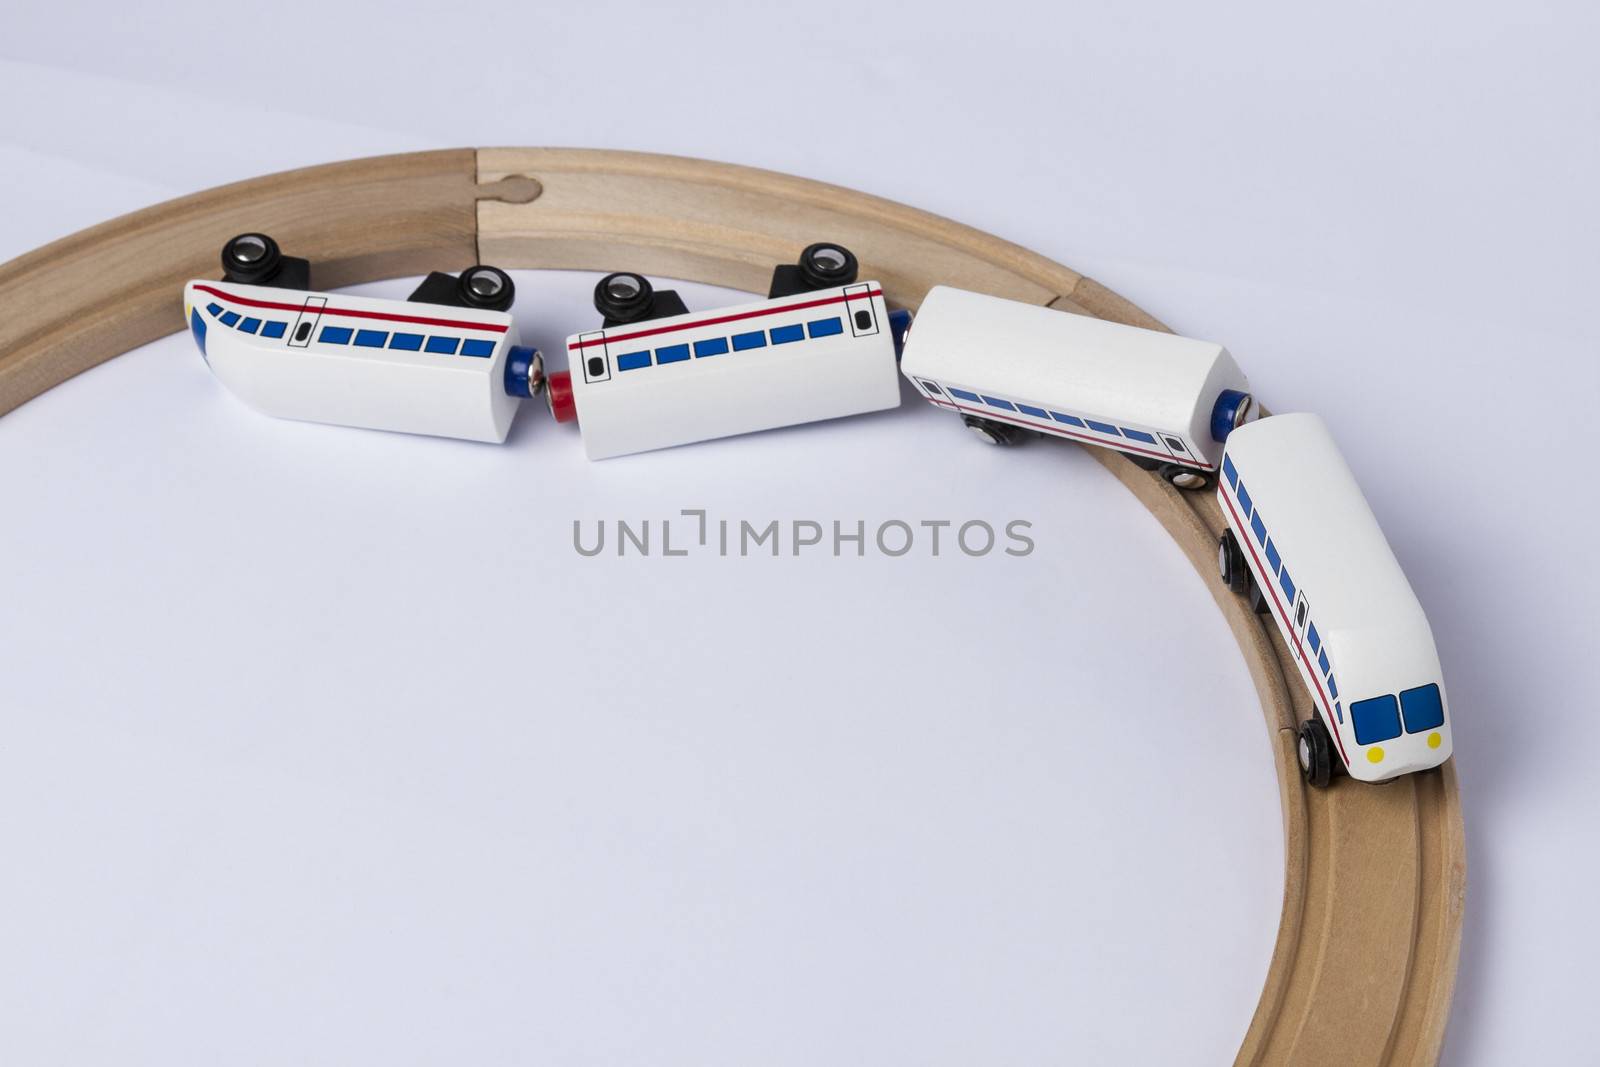 derail wooden toy train in top view. horizontal image